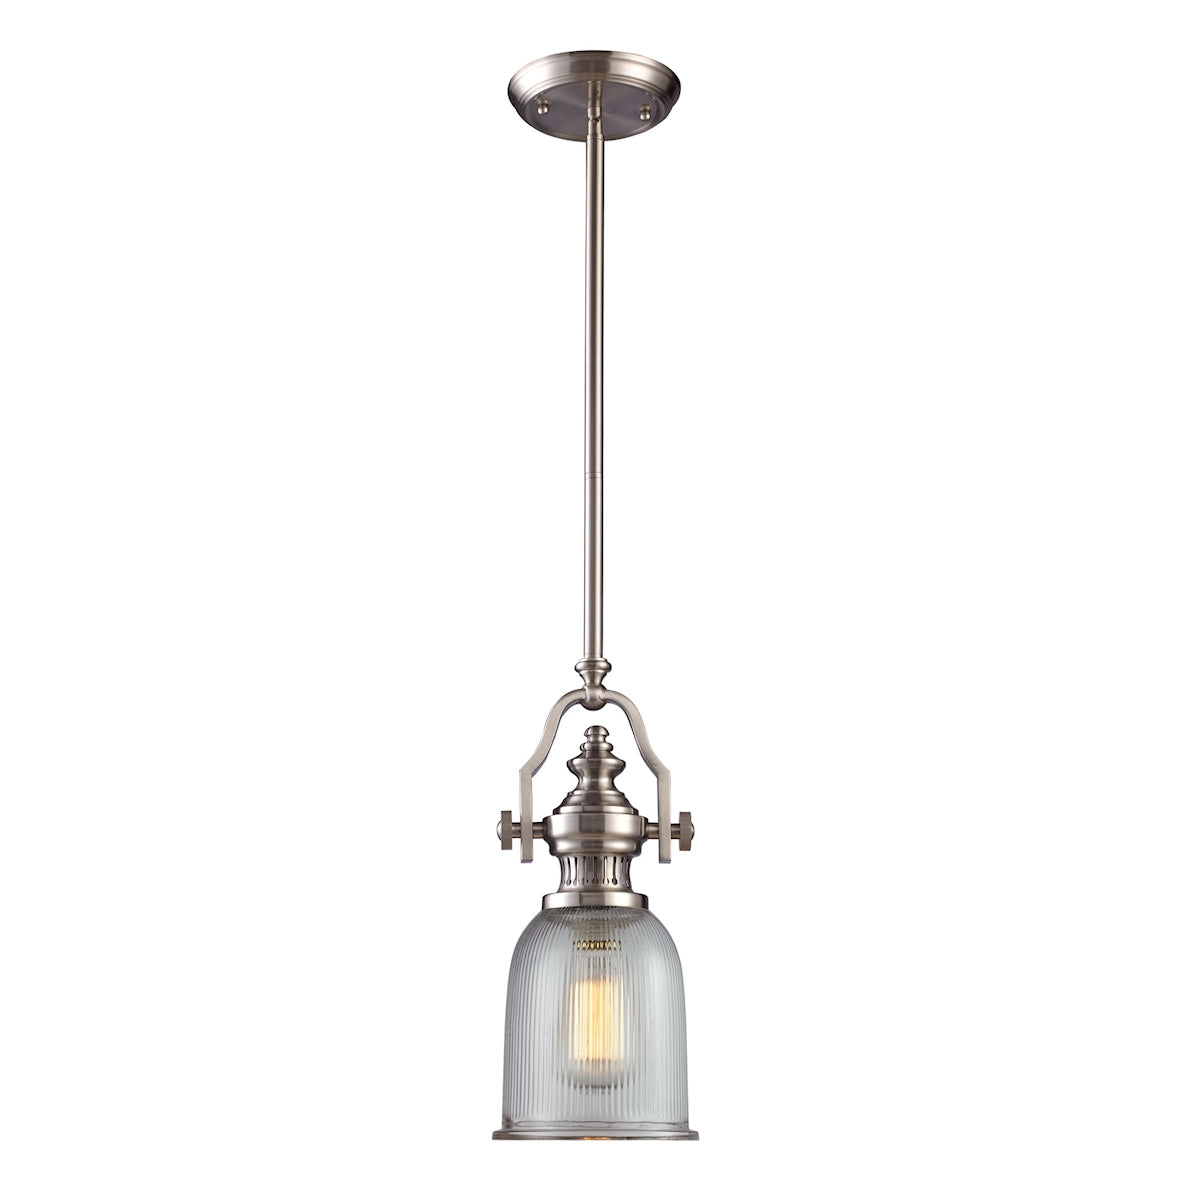 ELK Lighting 66771-1 Chadwick 1-Light Mini Pendant in Satin Nickel with Clear Ribbed Glass